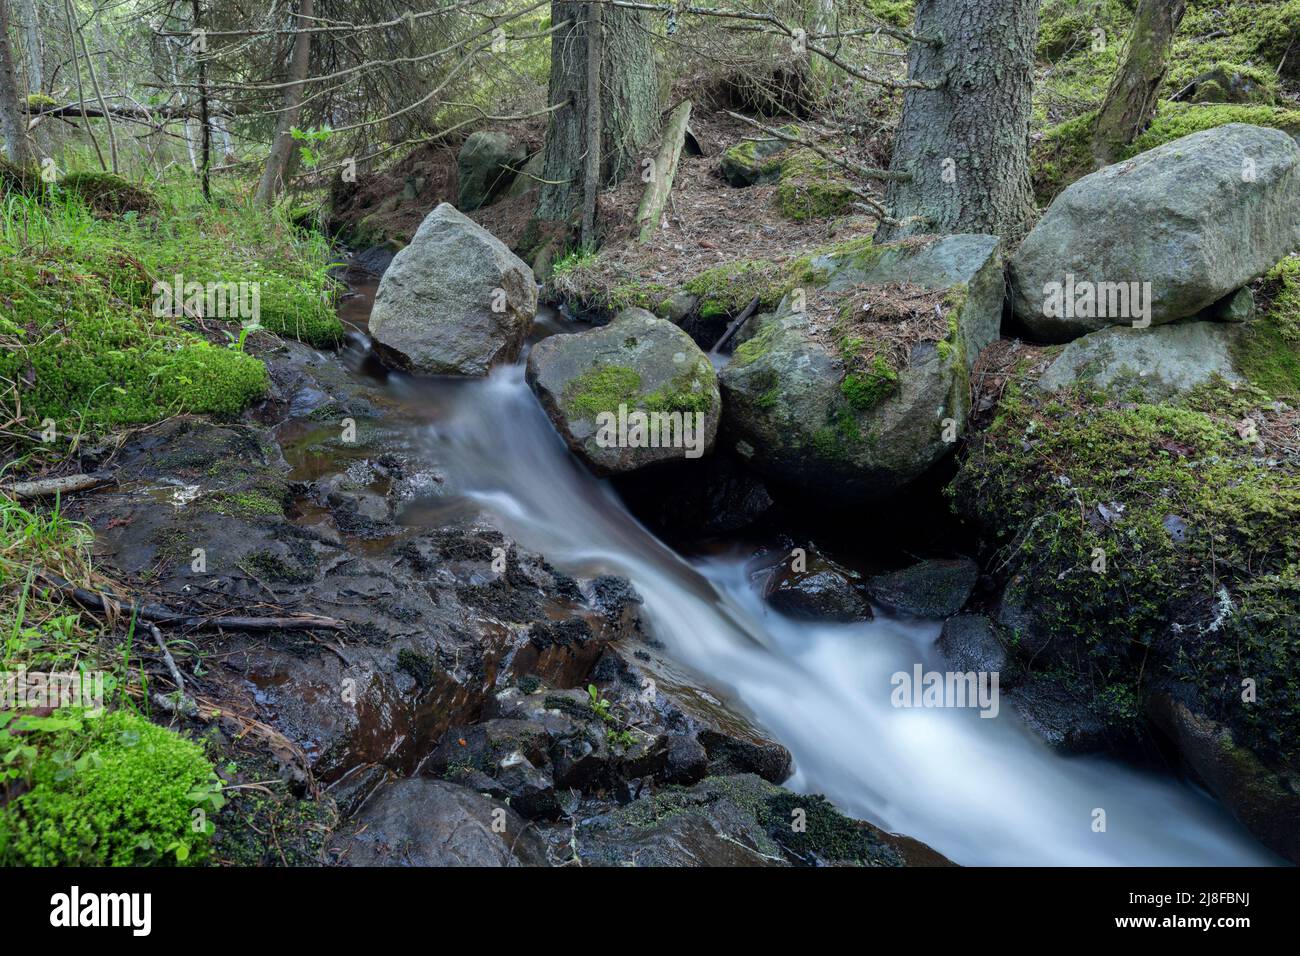 Small stream in natural forest photographed with long exposure. The location is a forest in Sweden. Stock Photo